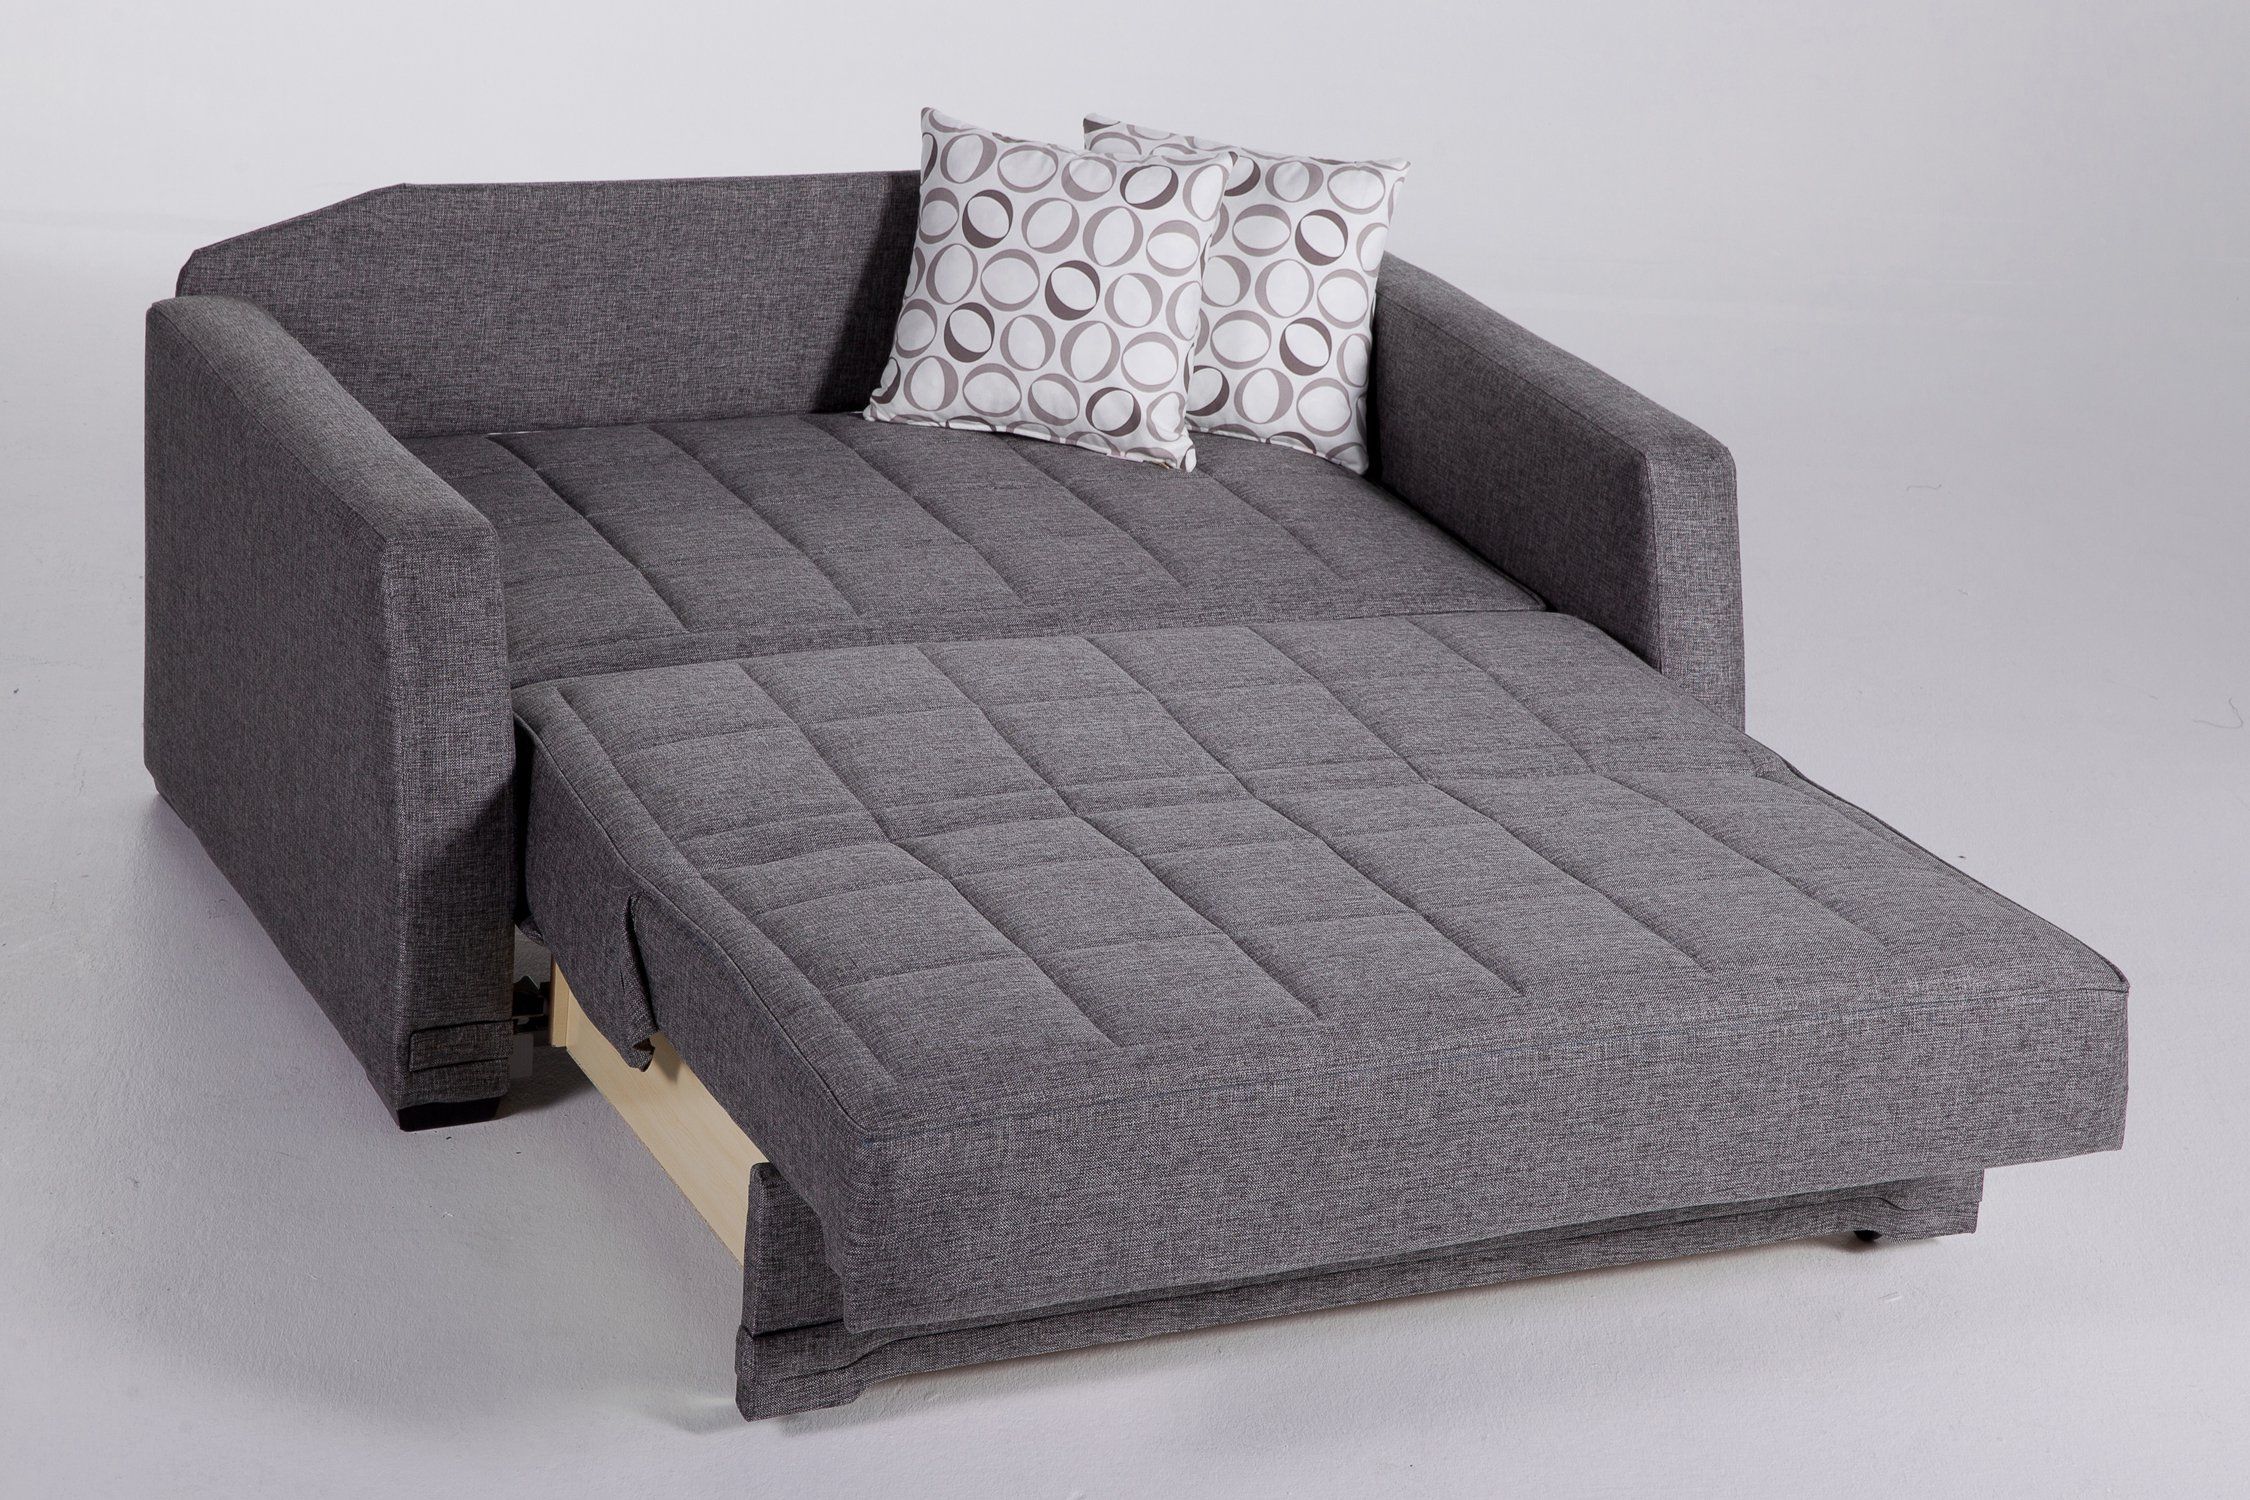 Valerie Diego Gray Loveseat Sleeperistikbal Furniture | Sofa Bed Pertaining To Convertible Gray Loveseat Sleepers (Gallery 19 of 20)